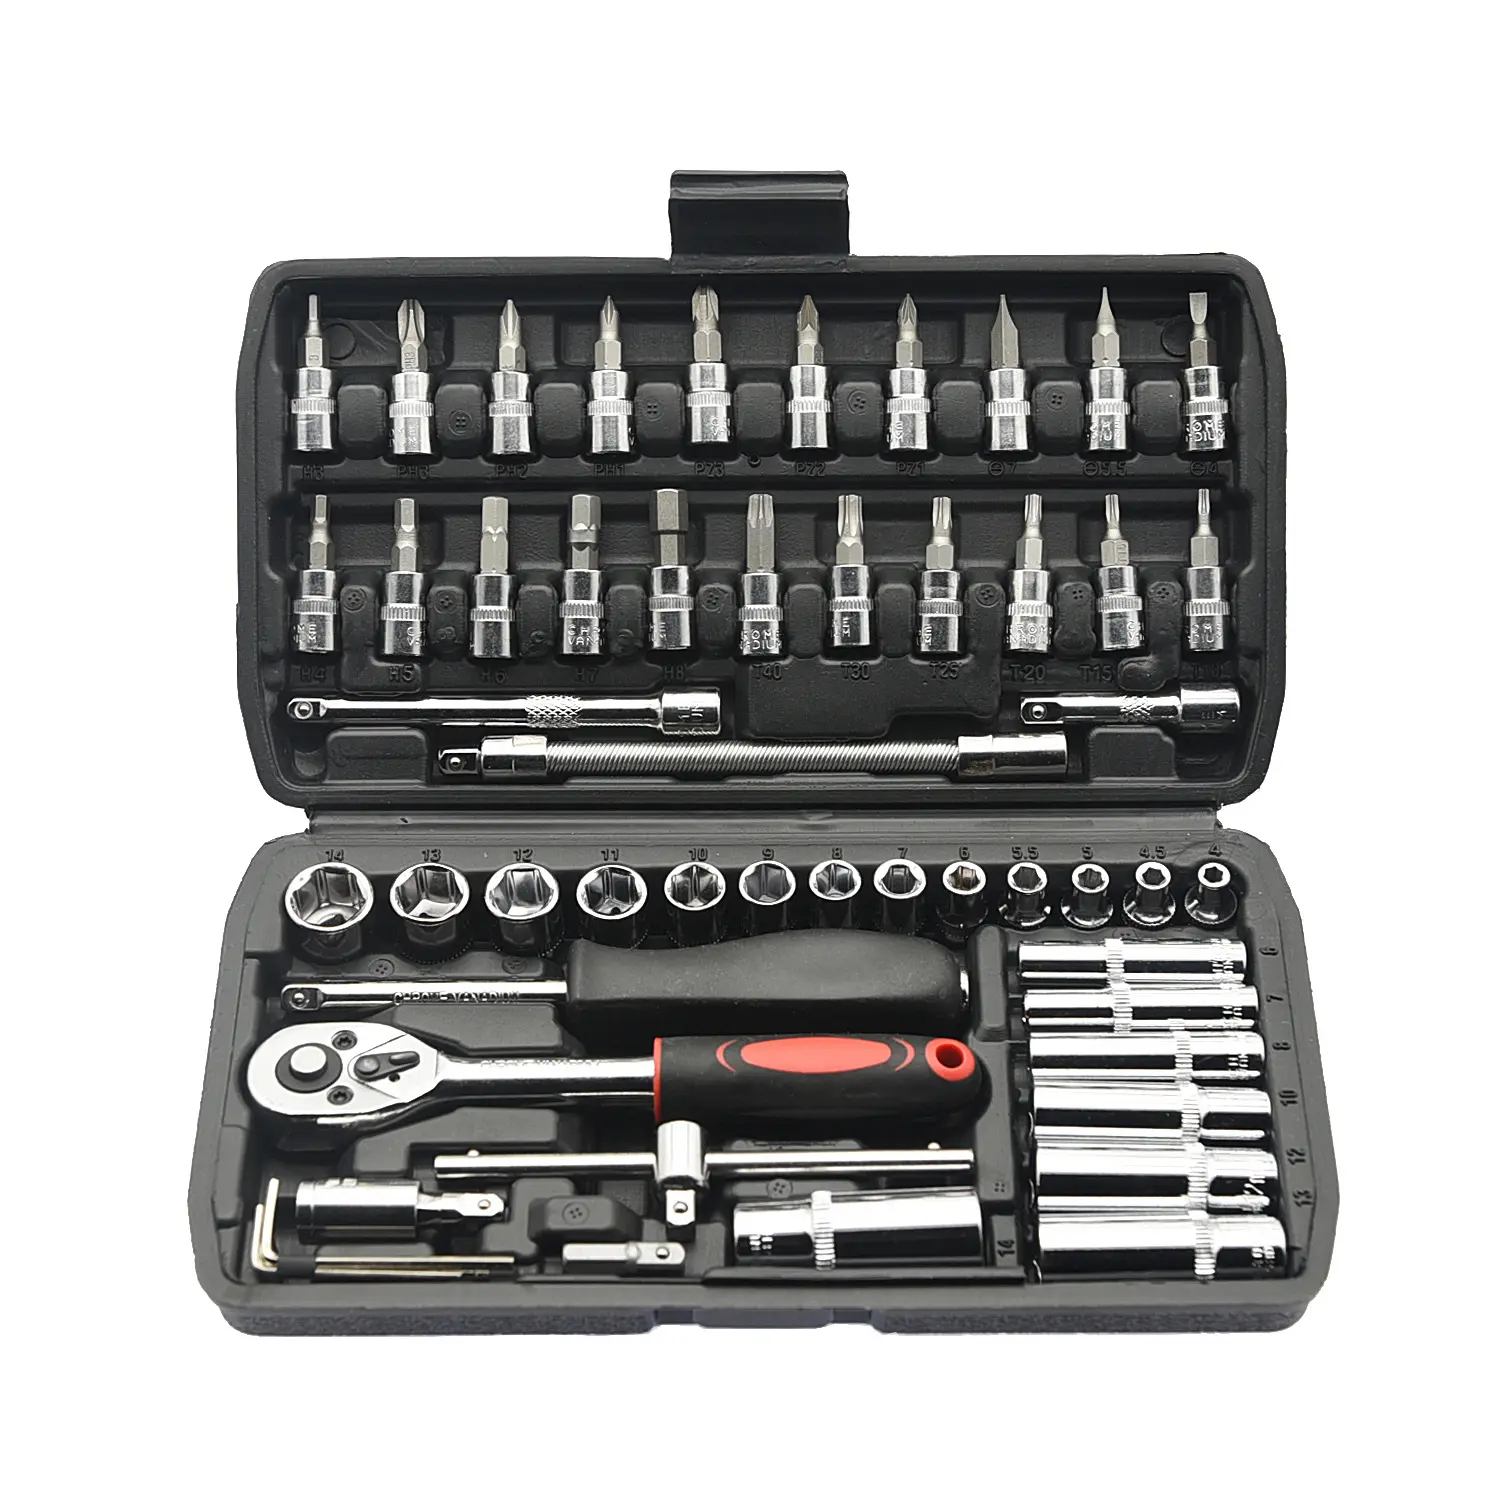 53 In 1 Professional Hand Mechanic Socket Wrench Tool Set For Cars Motorcycles And Bicycles Repair